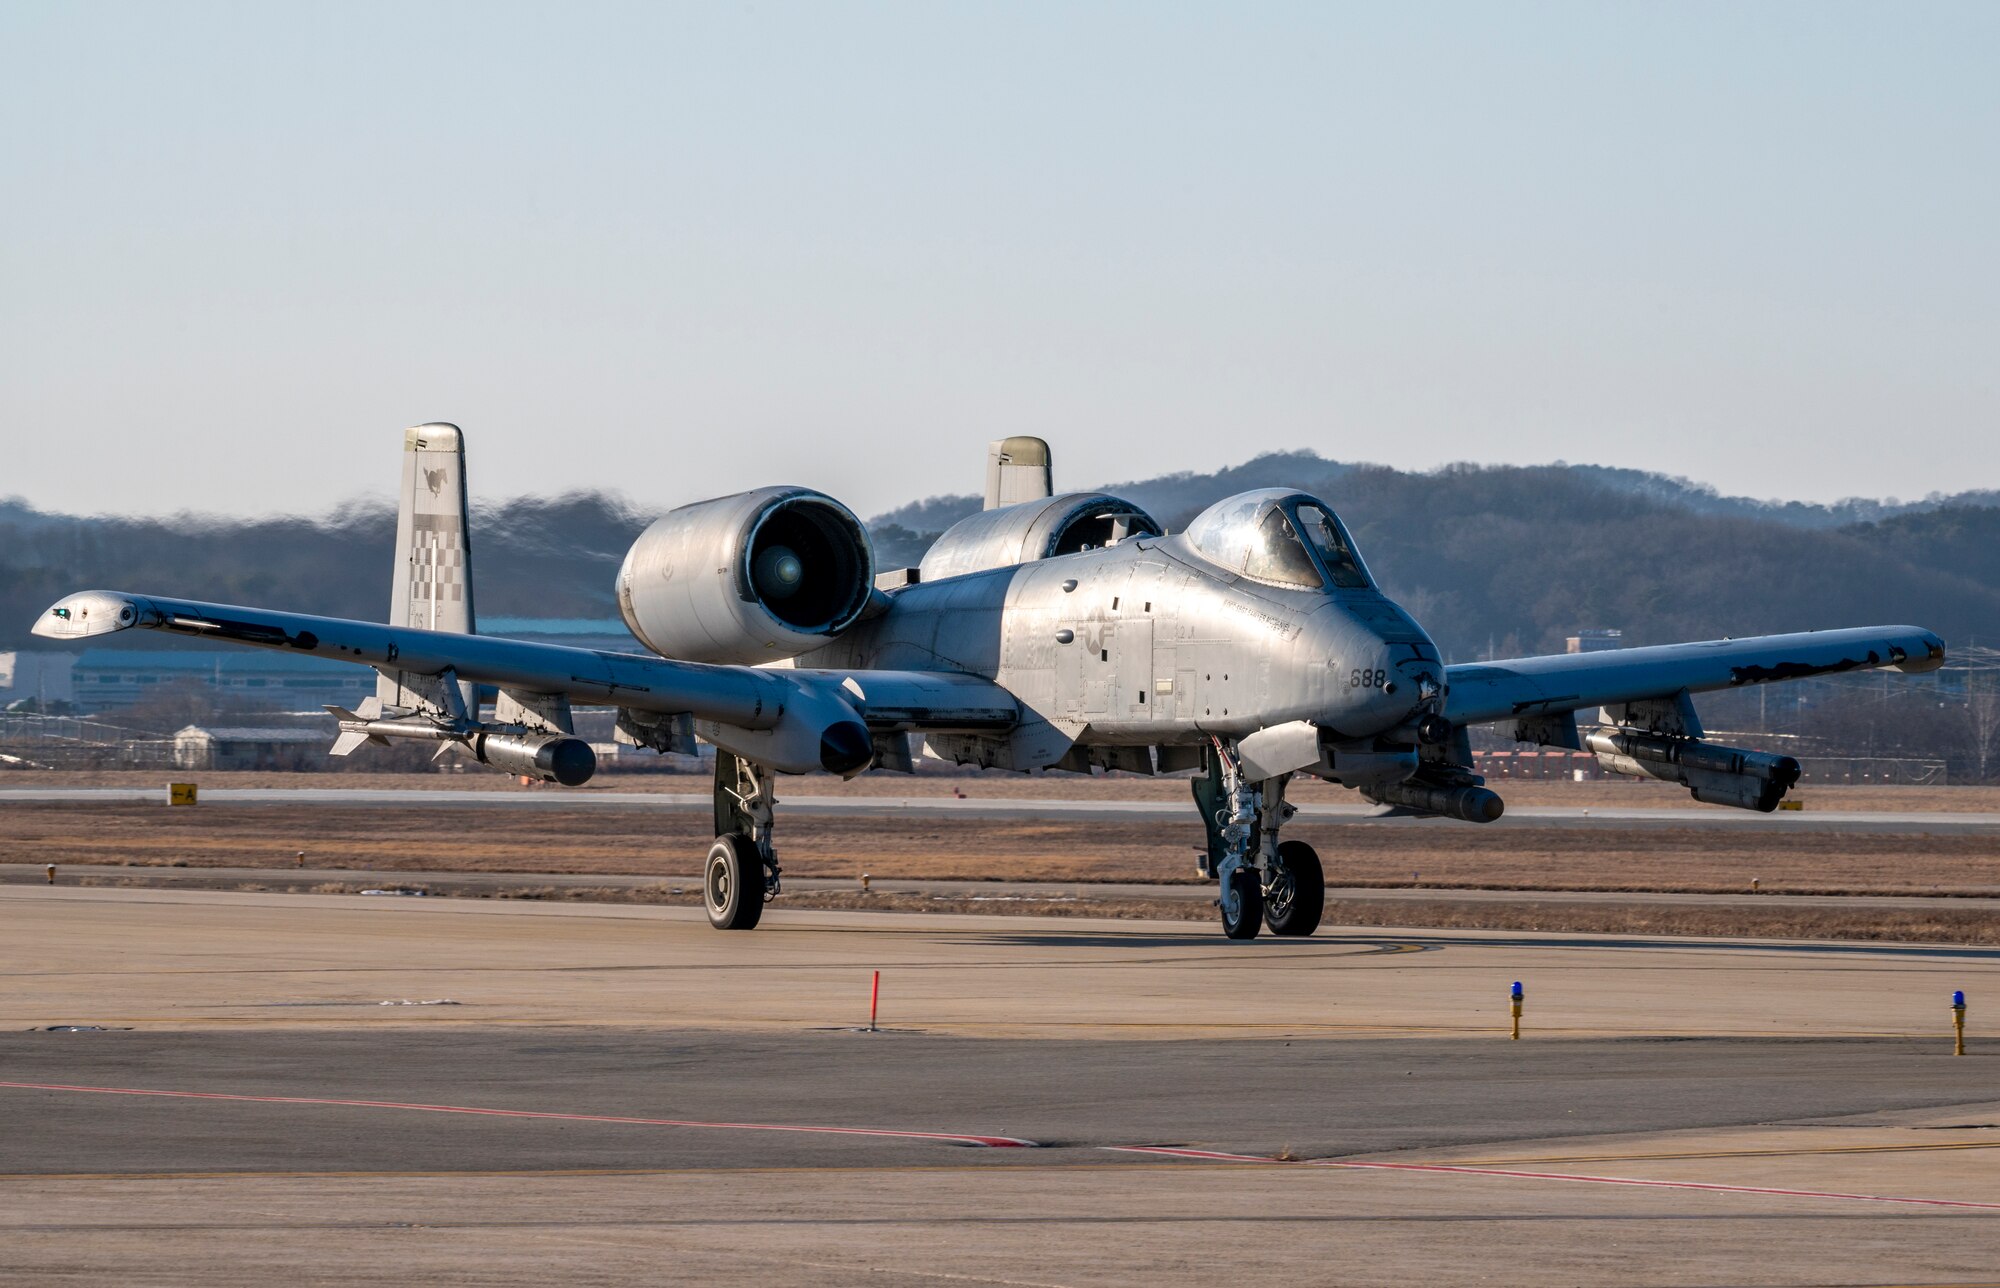 An A-10C Thunderbolt II assigned to the 25th Fighter Squadron taxis down the runway prior to a training sortie at Osan Air Base, Republic of Korea, Jan. 30, 2023. The week-long training event is designed to test Osan Airmen’s ability during a heightened state of readiness while providing combat ready forces for close air support, air strike control, forward air control-airborne, combat search and rescue, counter air and fire, and interdiction in the defense of the ROK. (U.S. Air Force Photo by Airman 1st Class Aaron Edwards)